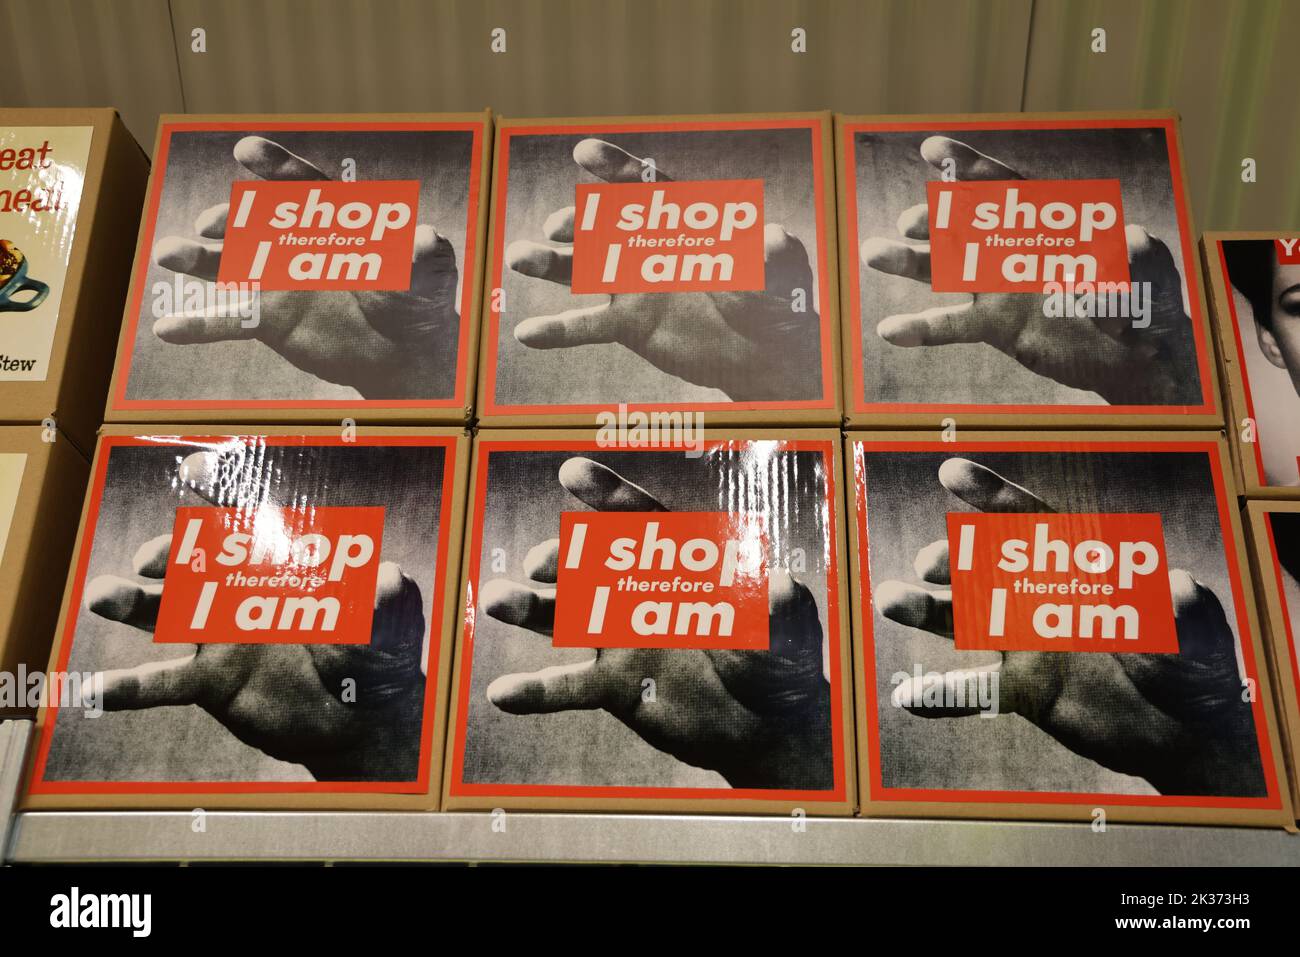 Posters with text 'I shop, therefore I am', exhibited at the Retrofuture expo in the Evoluon Stock Photo